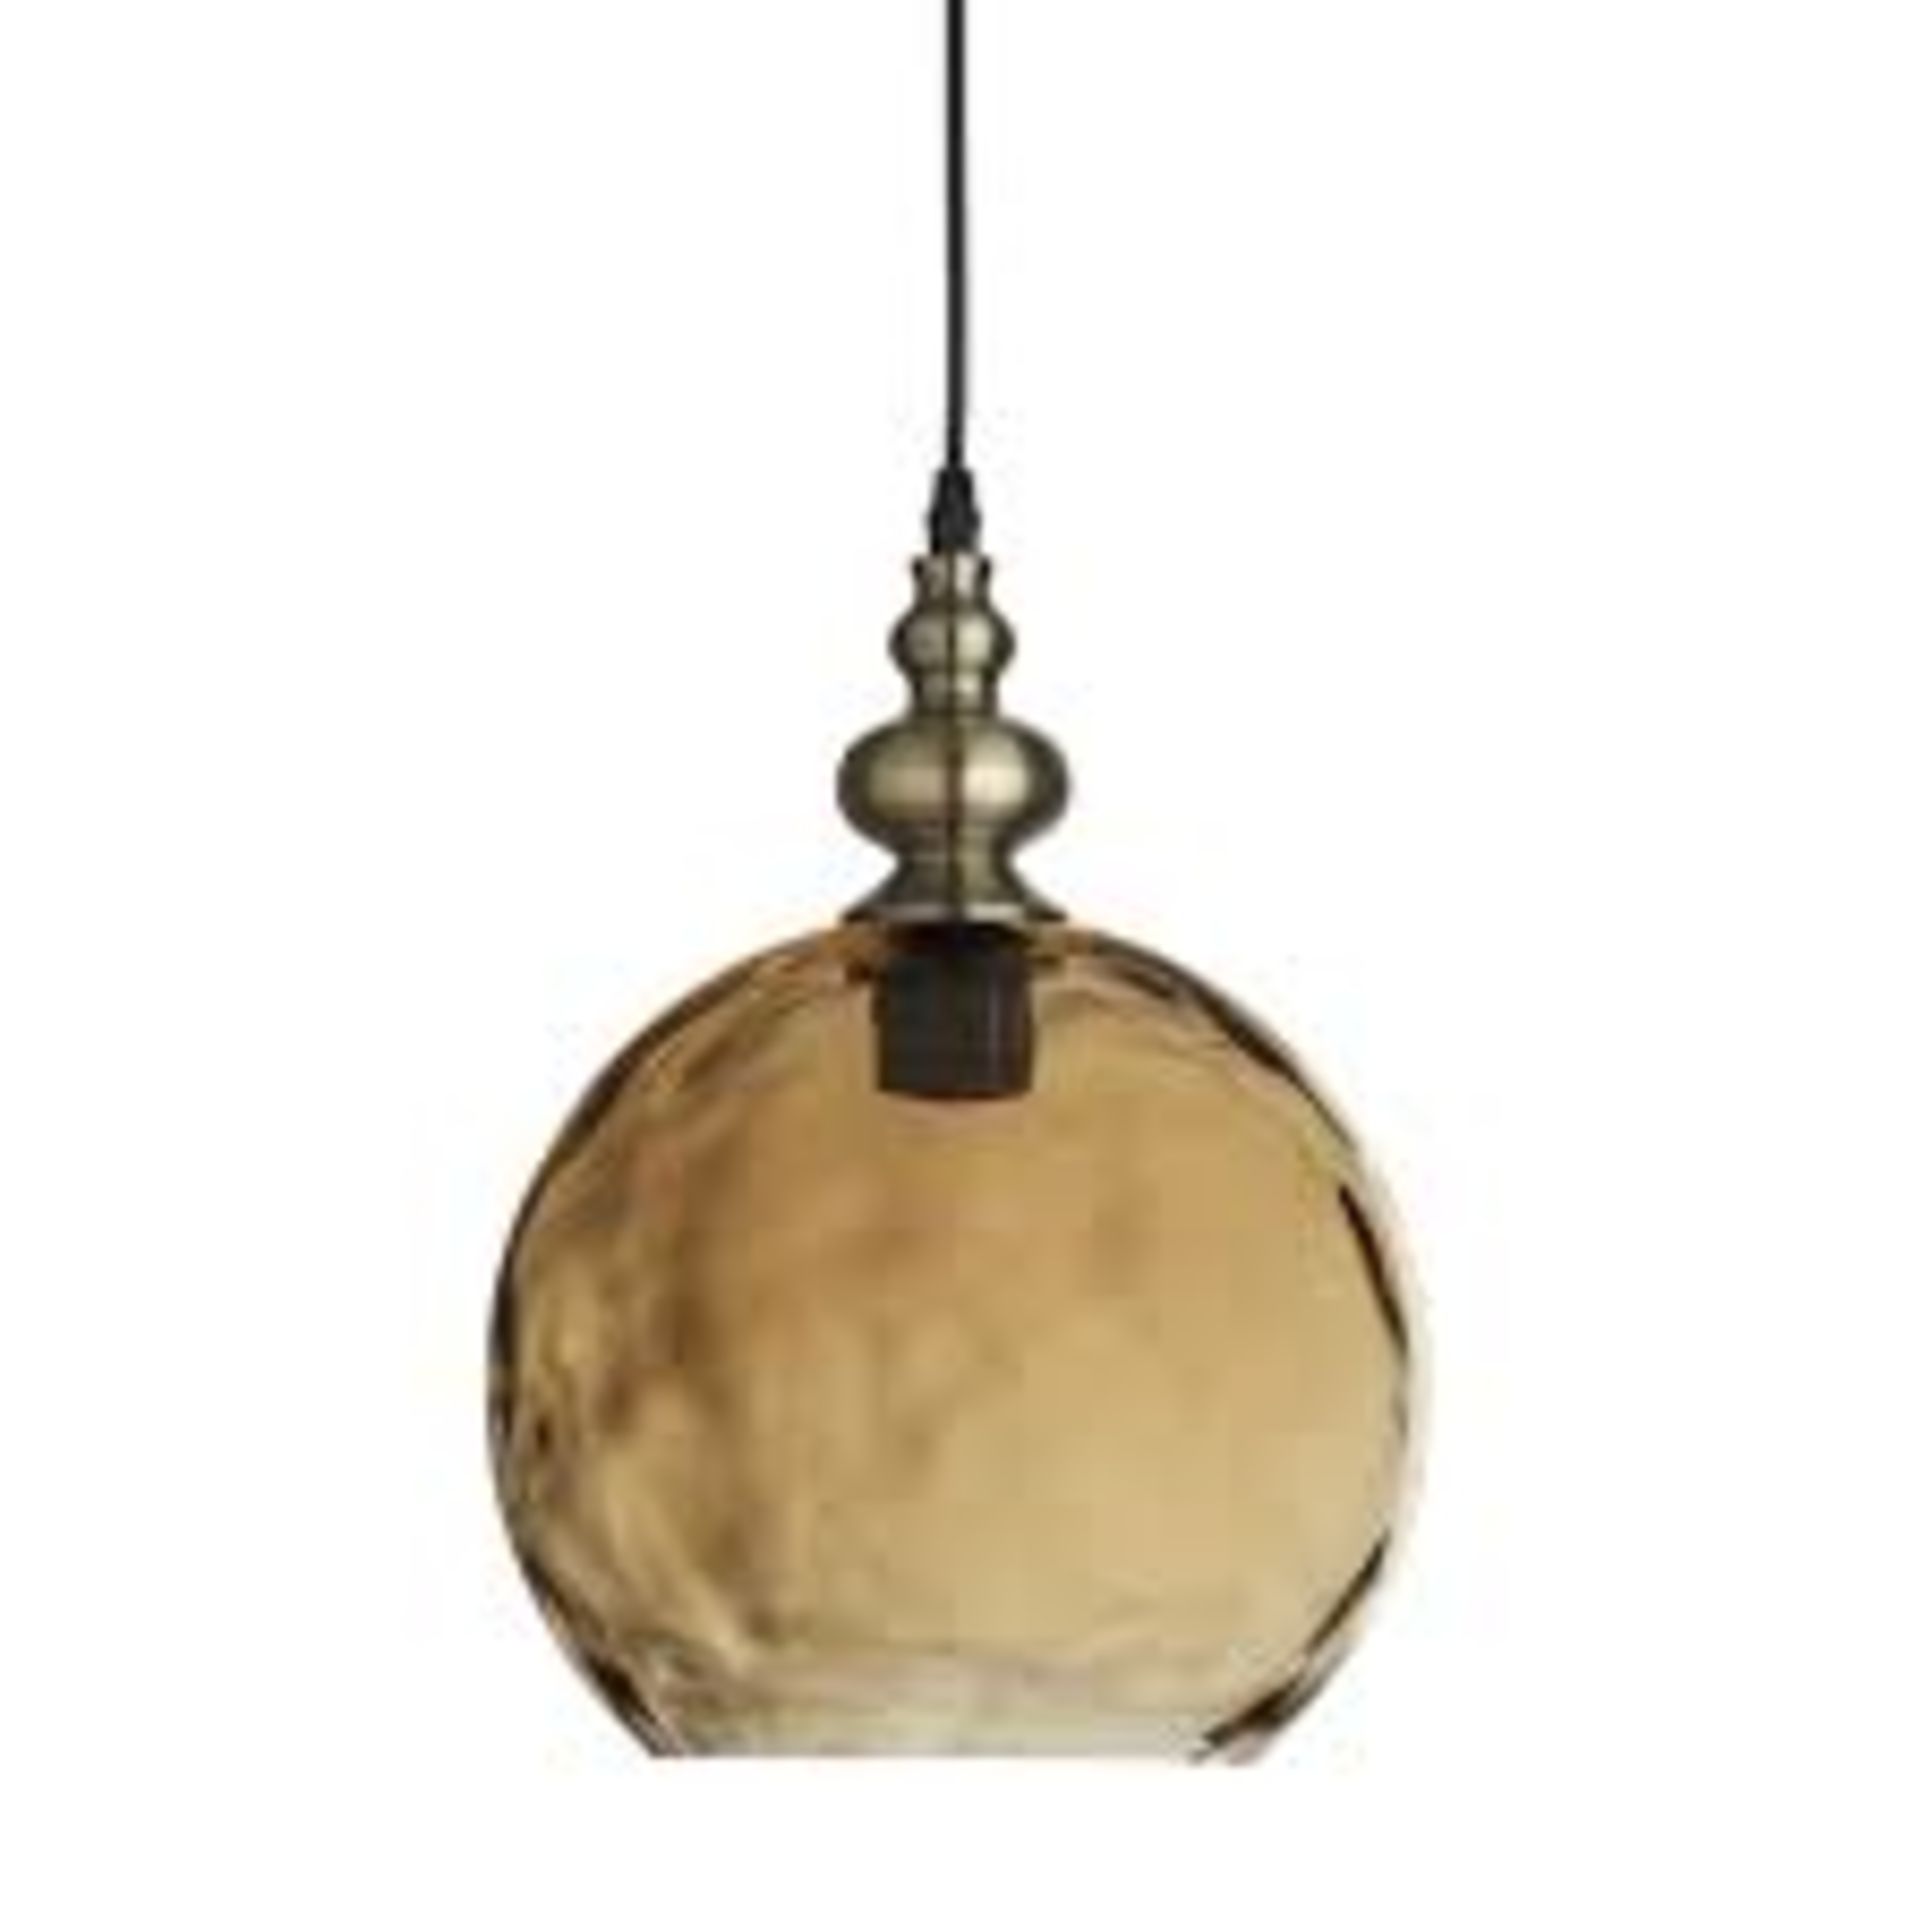 1 x Indiana Globe Pendant in antique brass - Ref: 2020AM - New And Boxed Stock - RRP: £80 - Image 2 of 4